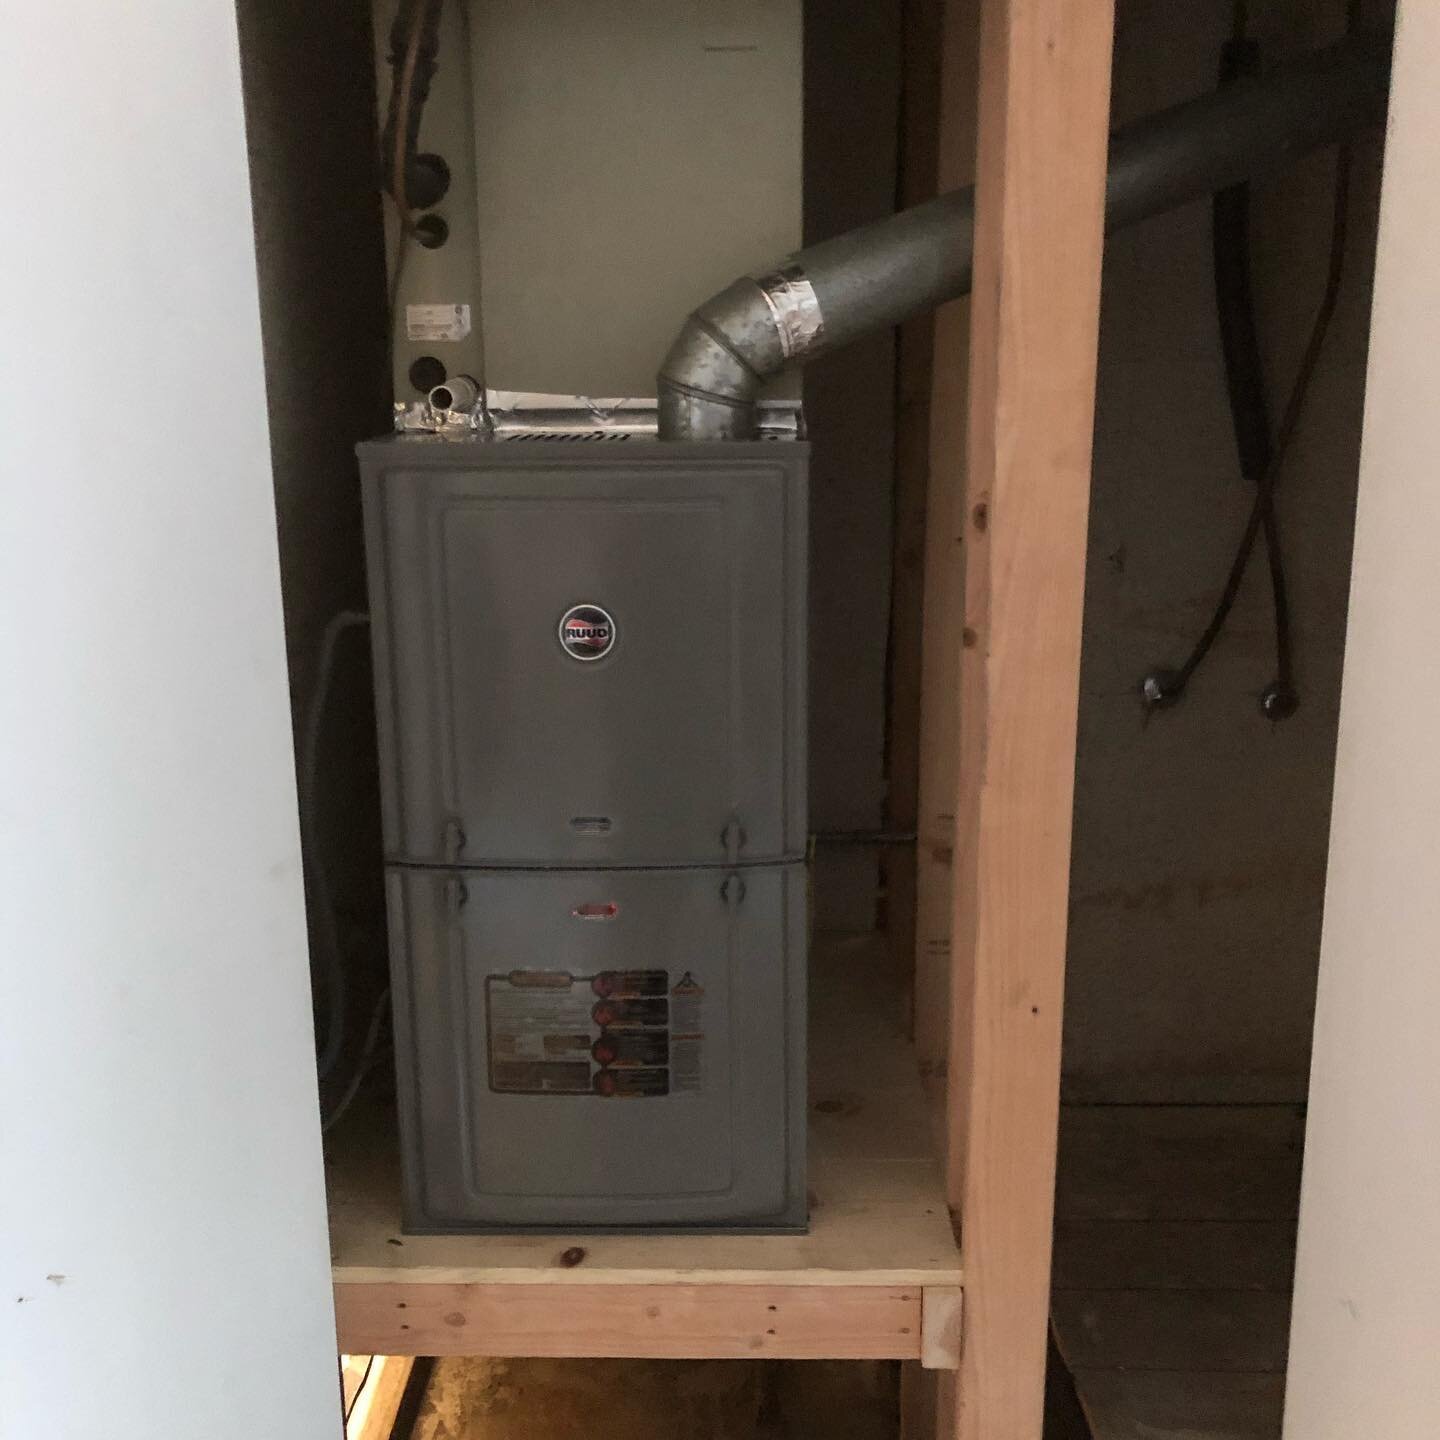 Out with old and in with the new. Furnace replacement and resizing the closet.